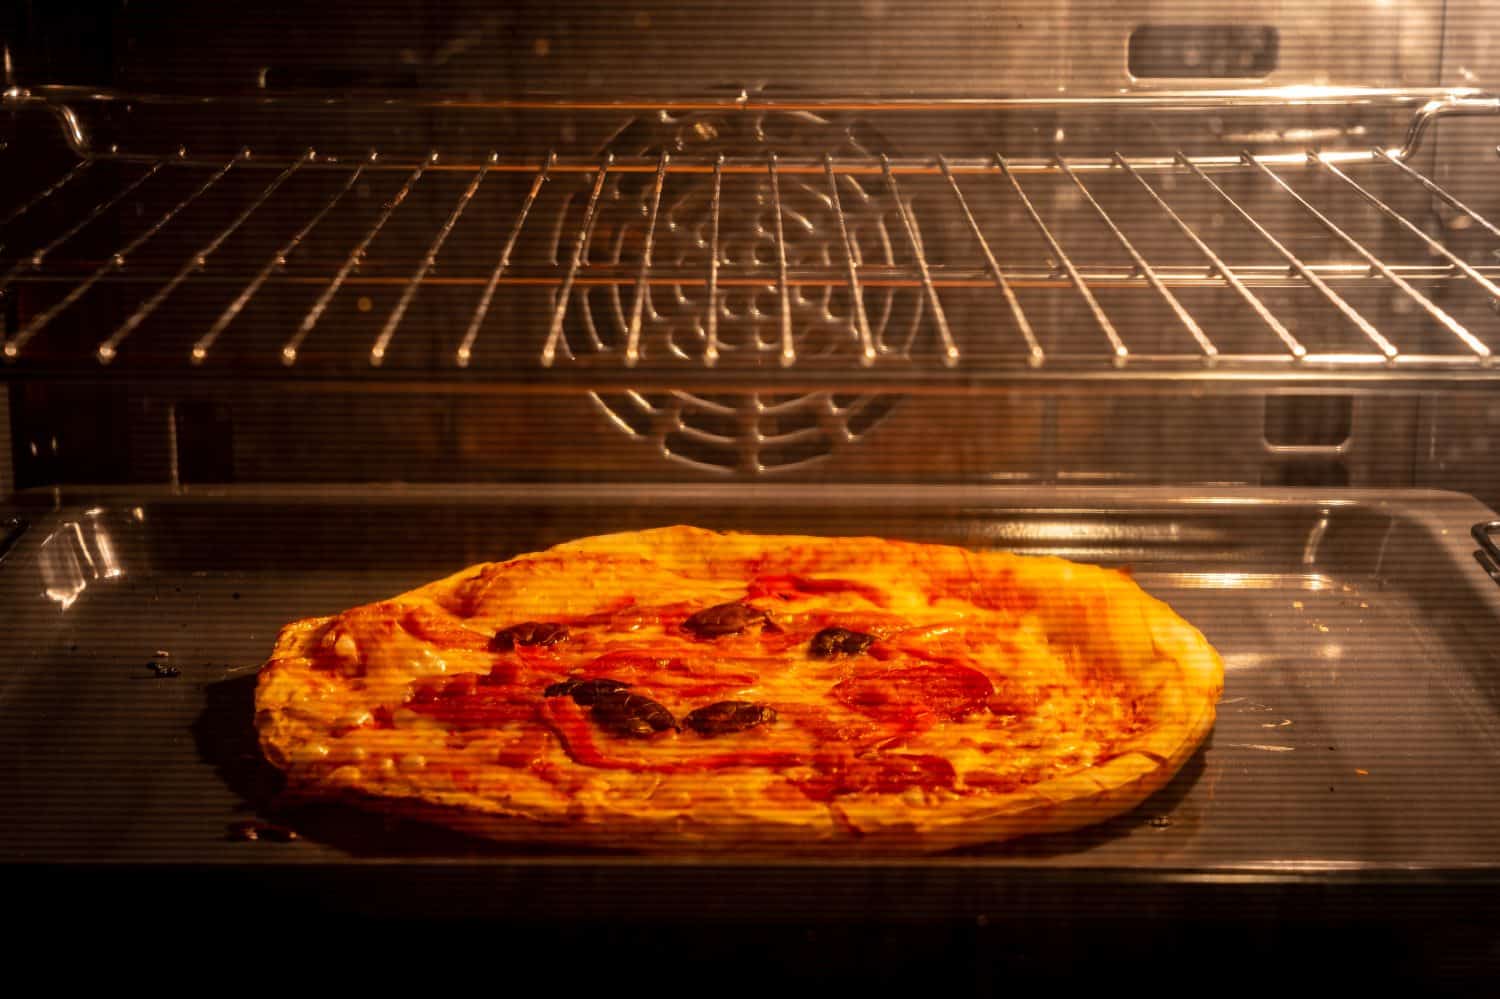 Frozen pizza reheated in the electric oven